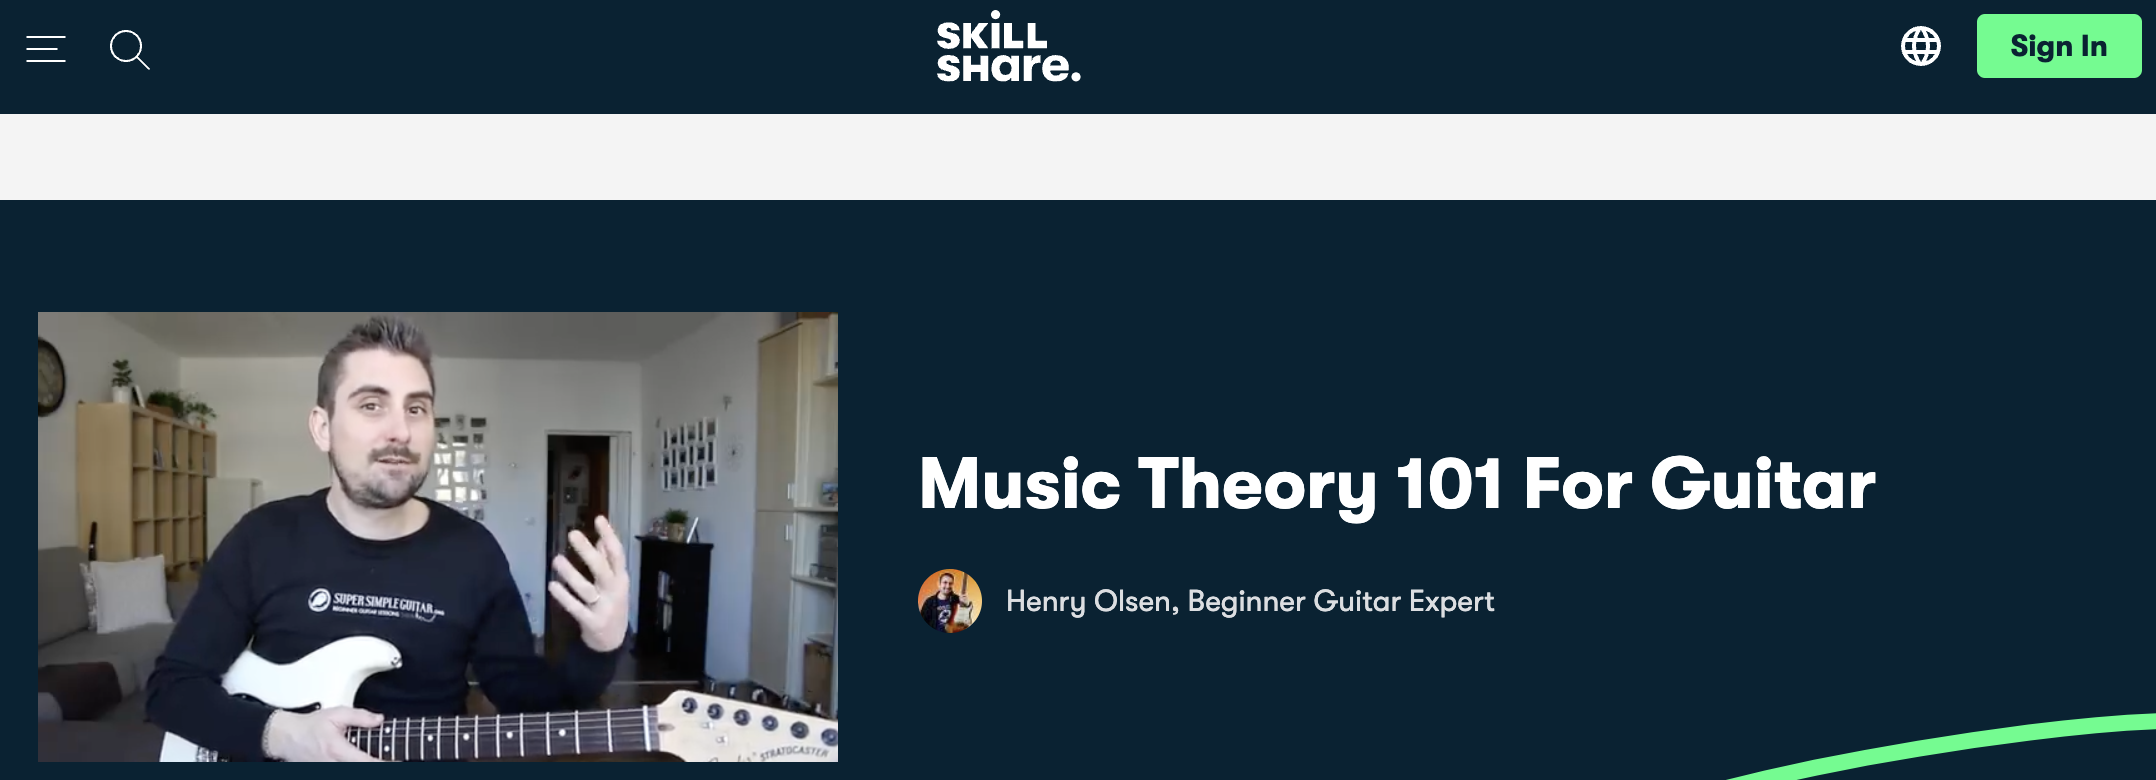 Music Theory 101 For Guitar